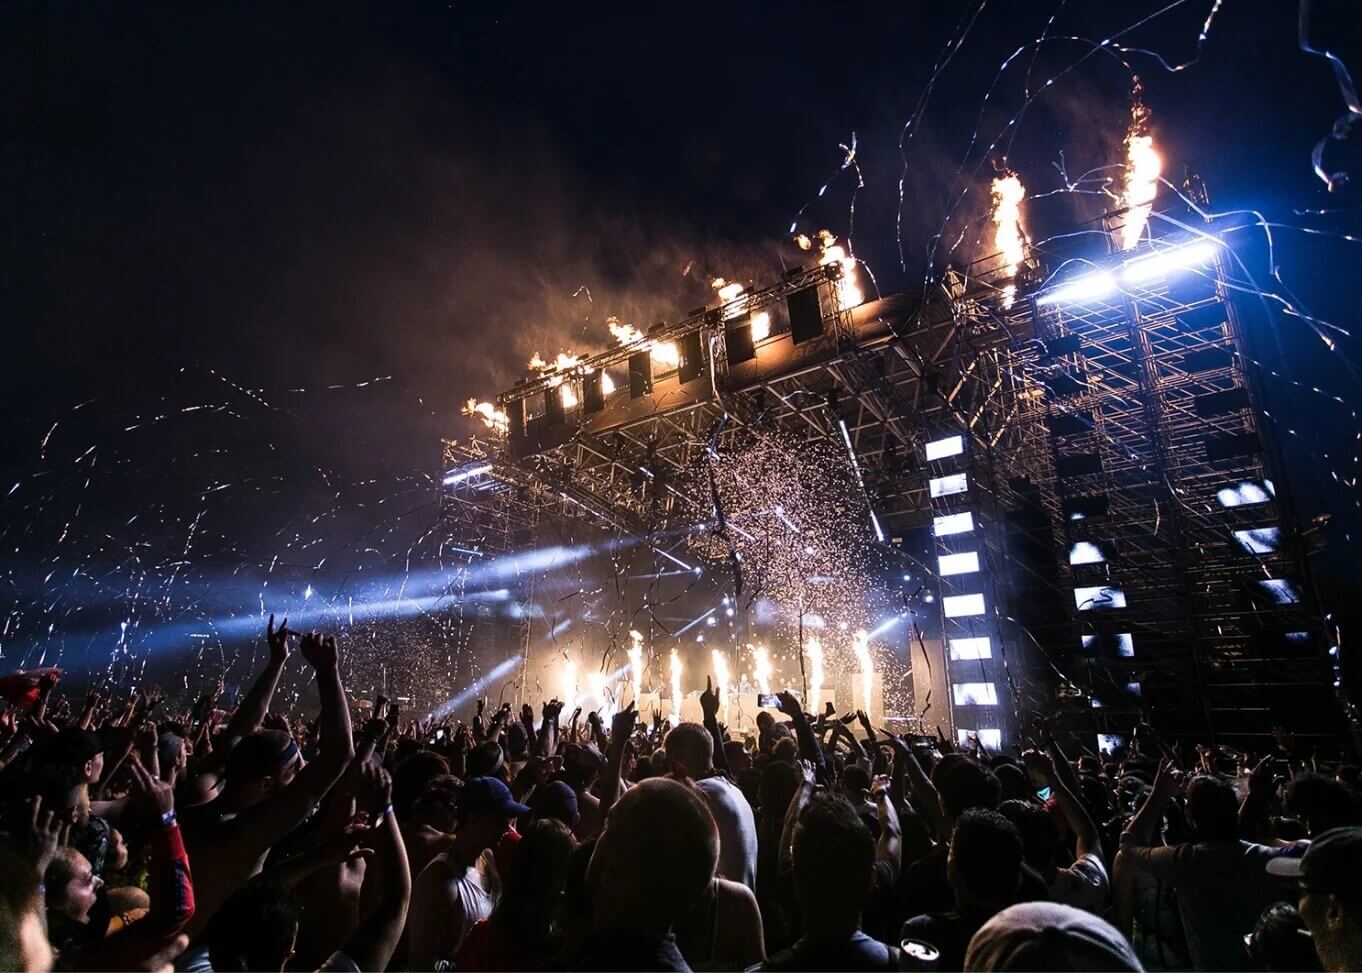 A large stage with lights and pyrotechnics in front of a huge crowd